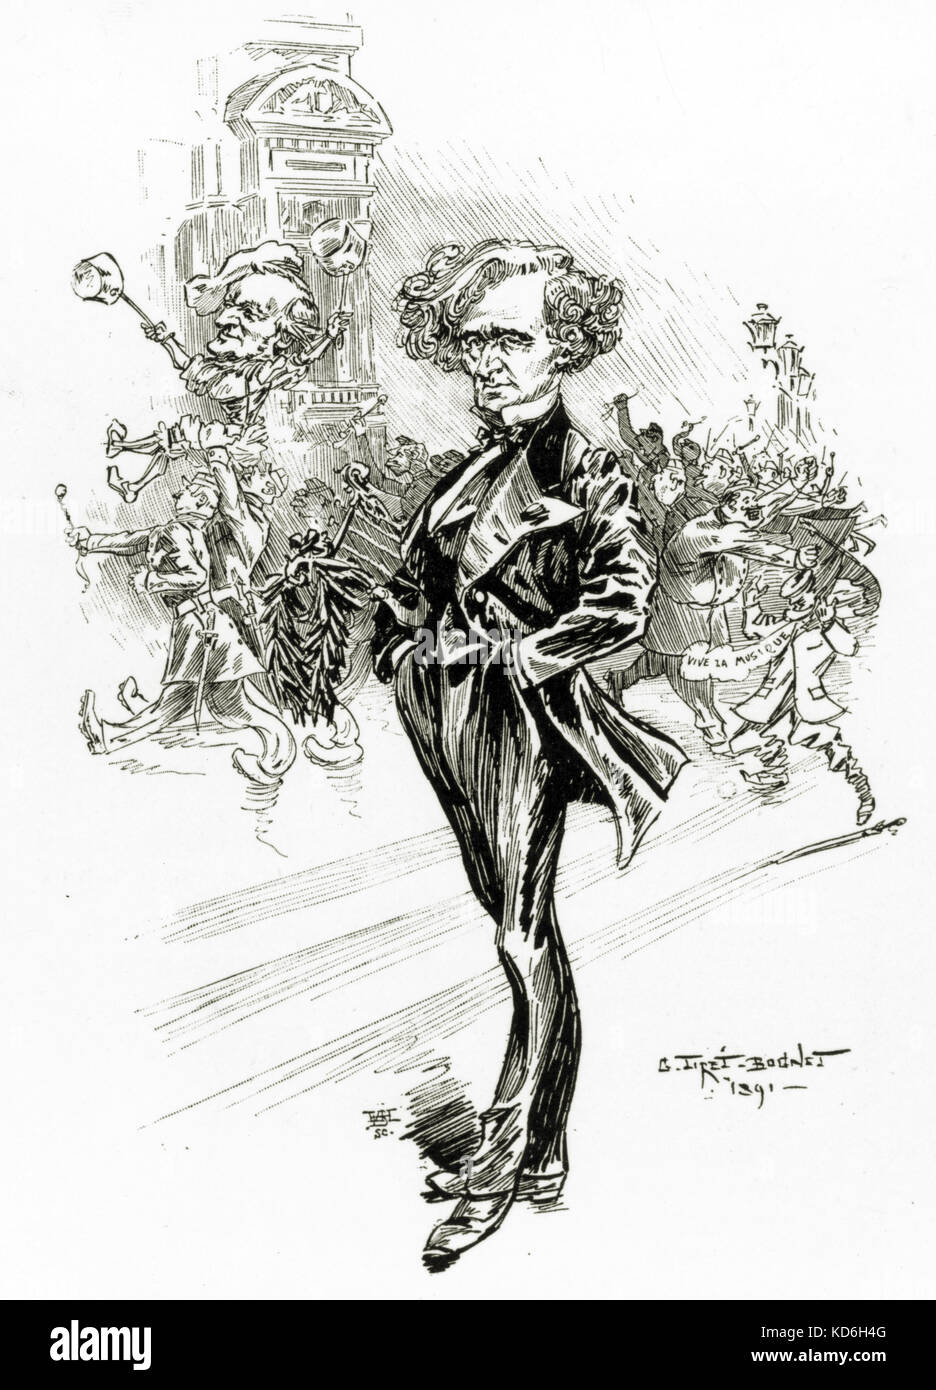 Hector BERLIOZ-caricature by Grand-Carteret showing Wagner in the background. The caption reads: 'Si c'est ainsi qu'on entre à l'Opéra, cela me console d'être resté sur les marches!...' ('If this is how one makes one's way into the Opera, it consoles me to remain on the steps!... '). French composer (1803-1869). Stock Photo